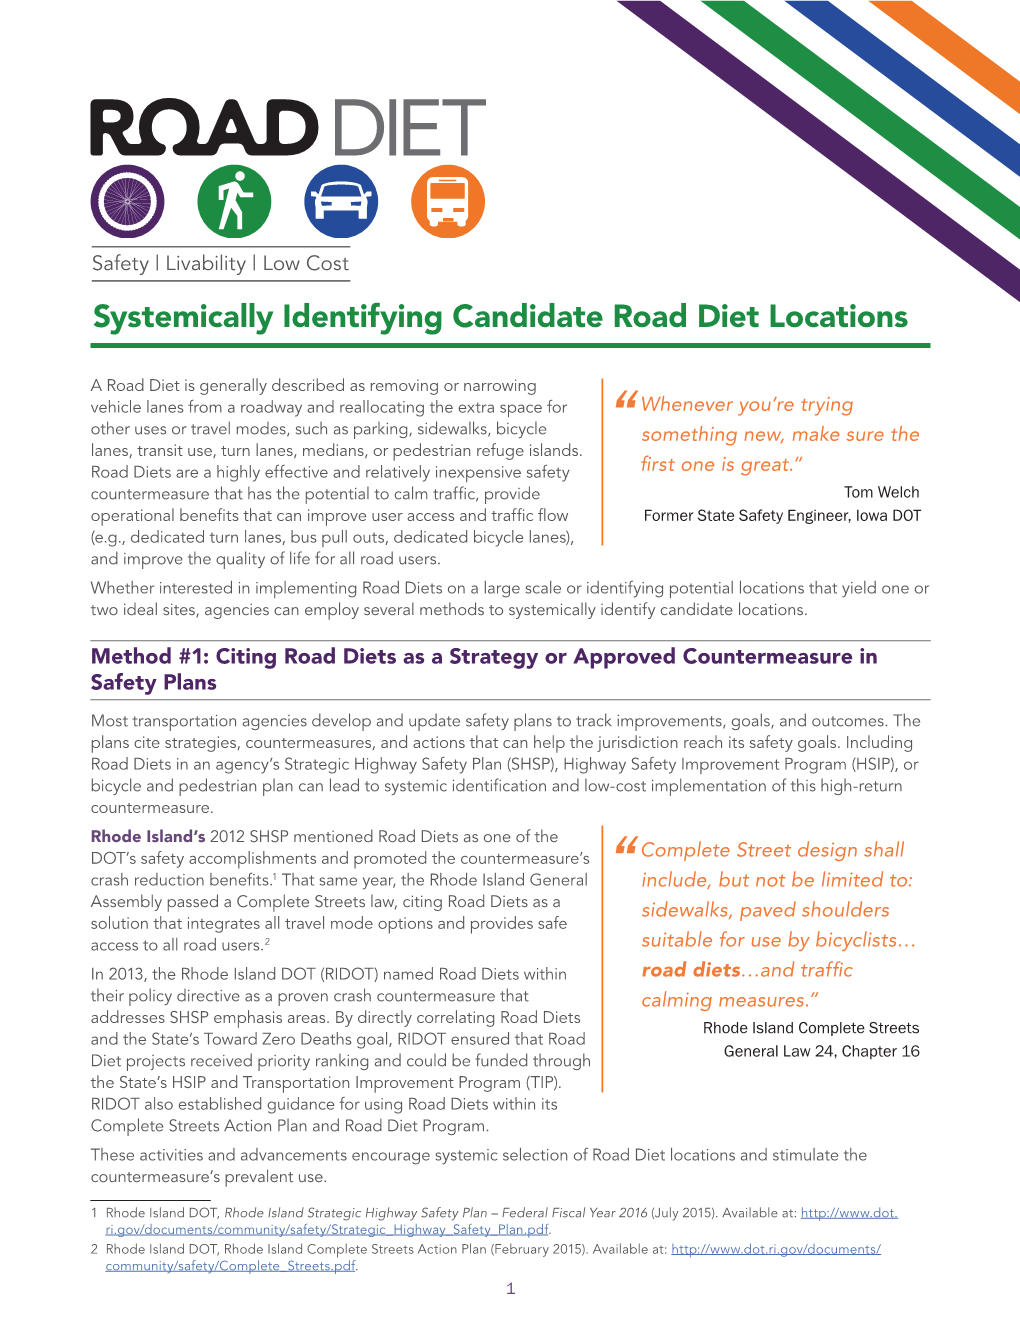 Systemically Identifying Candidate Road Diet Locations